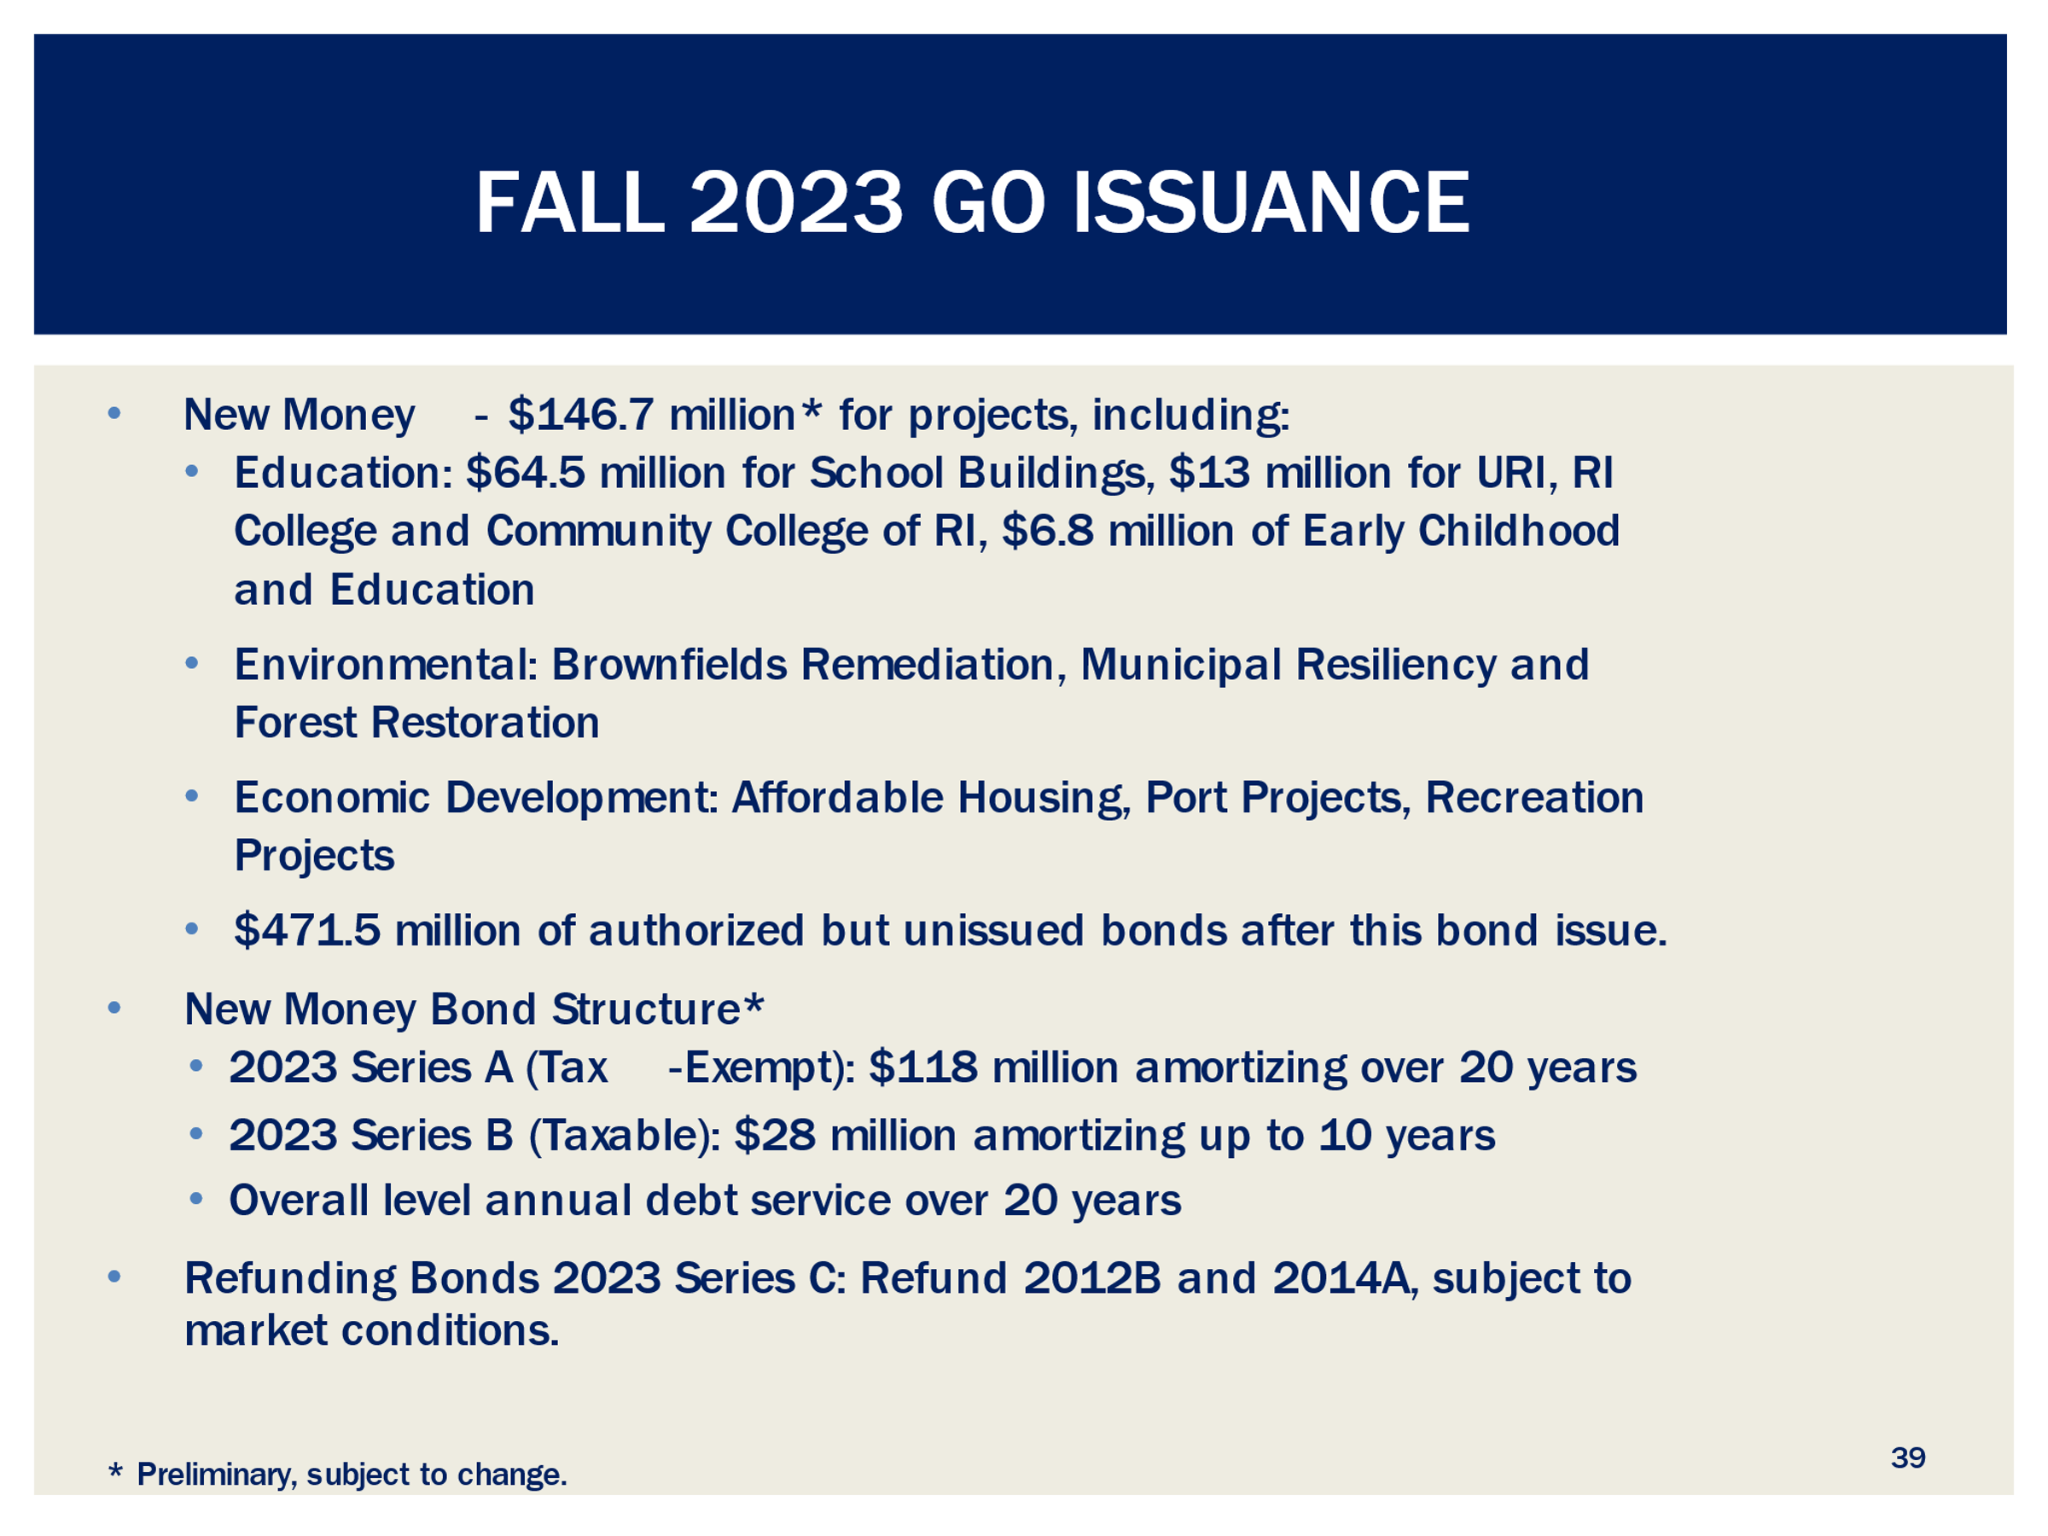 Fall 2023 GO Issuance